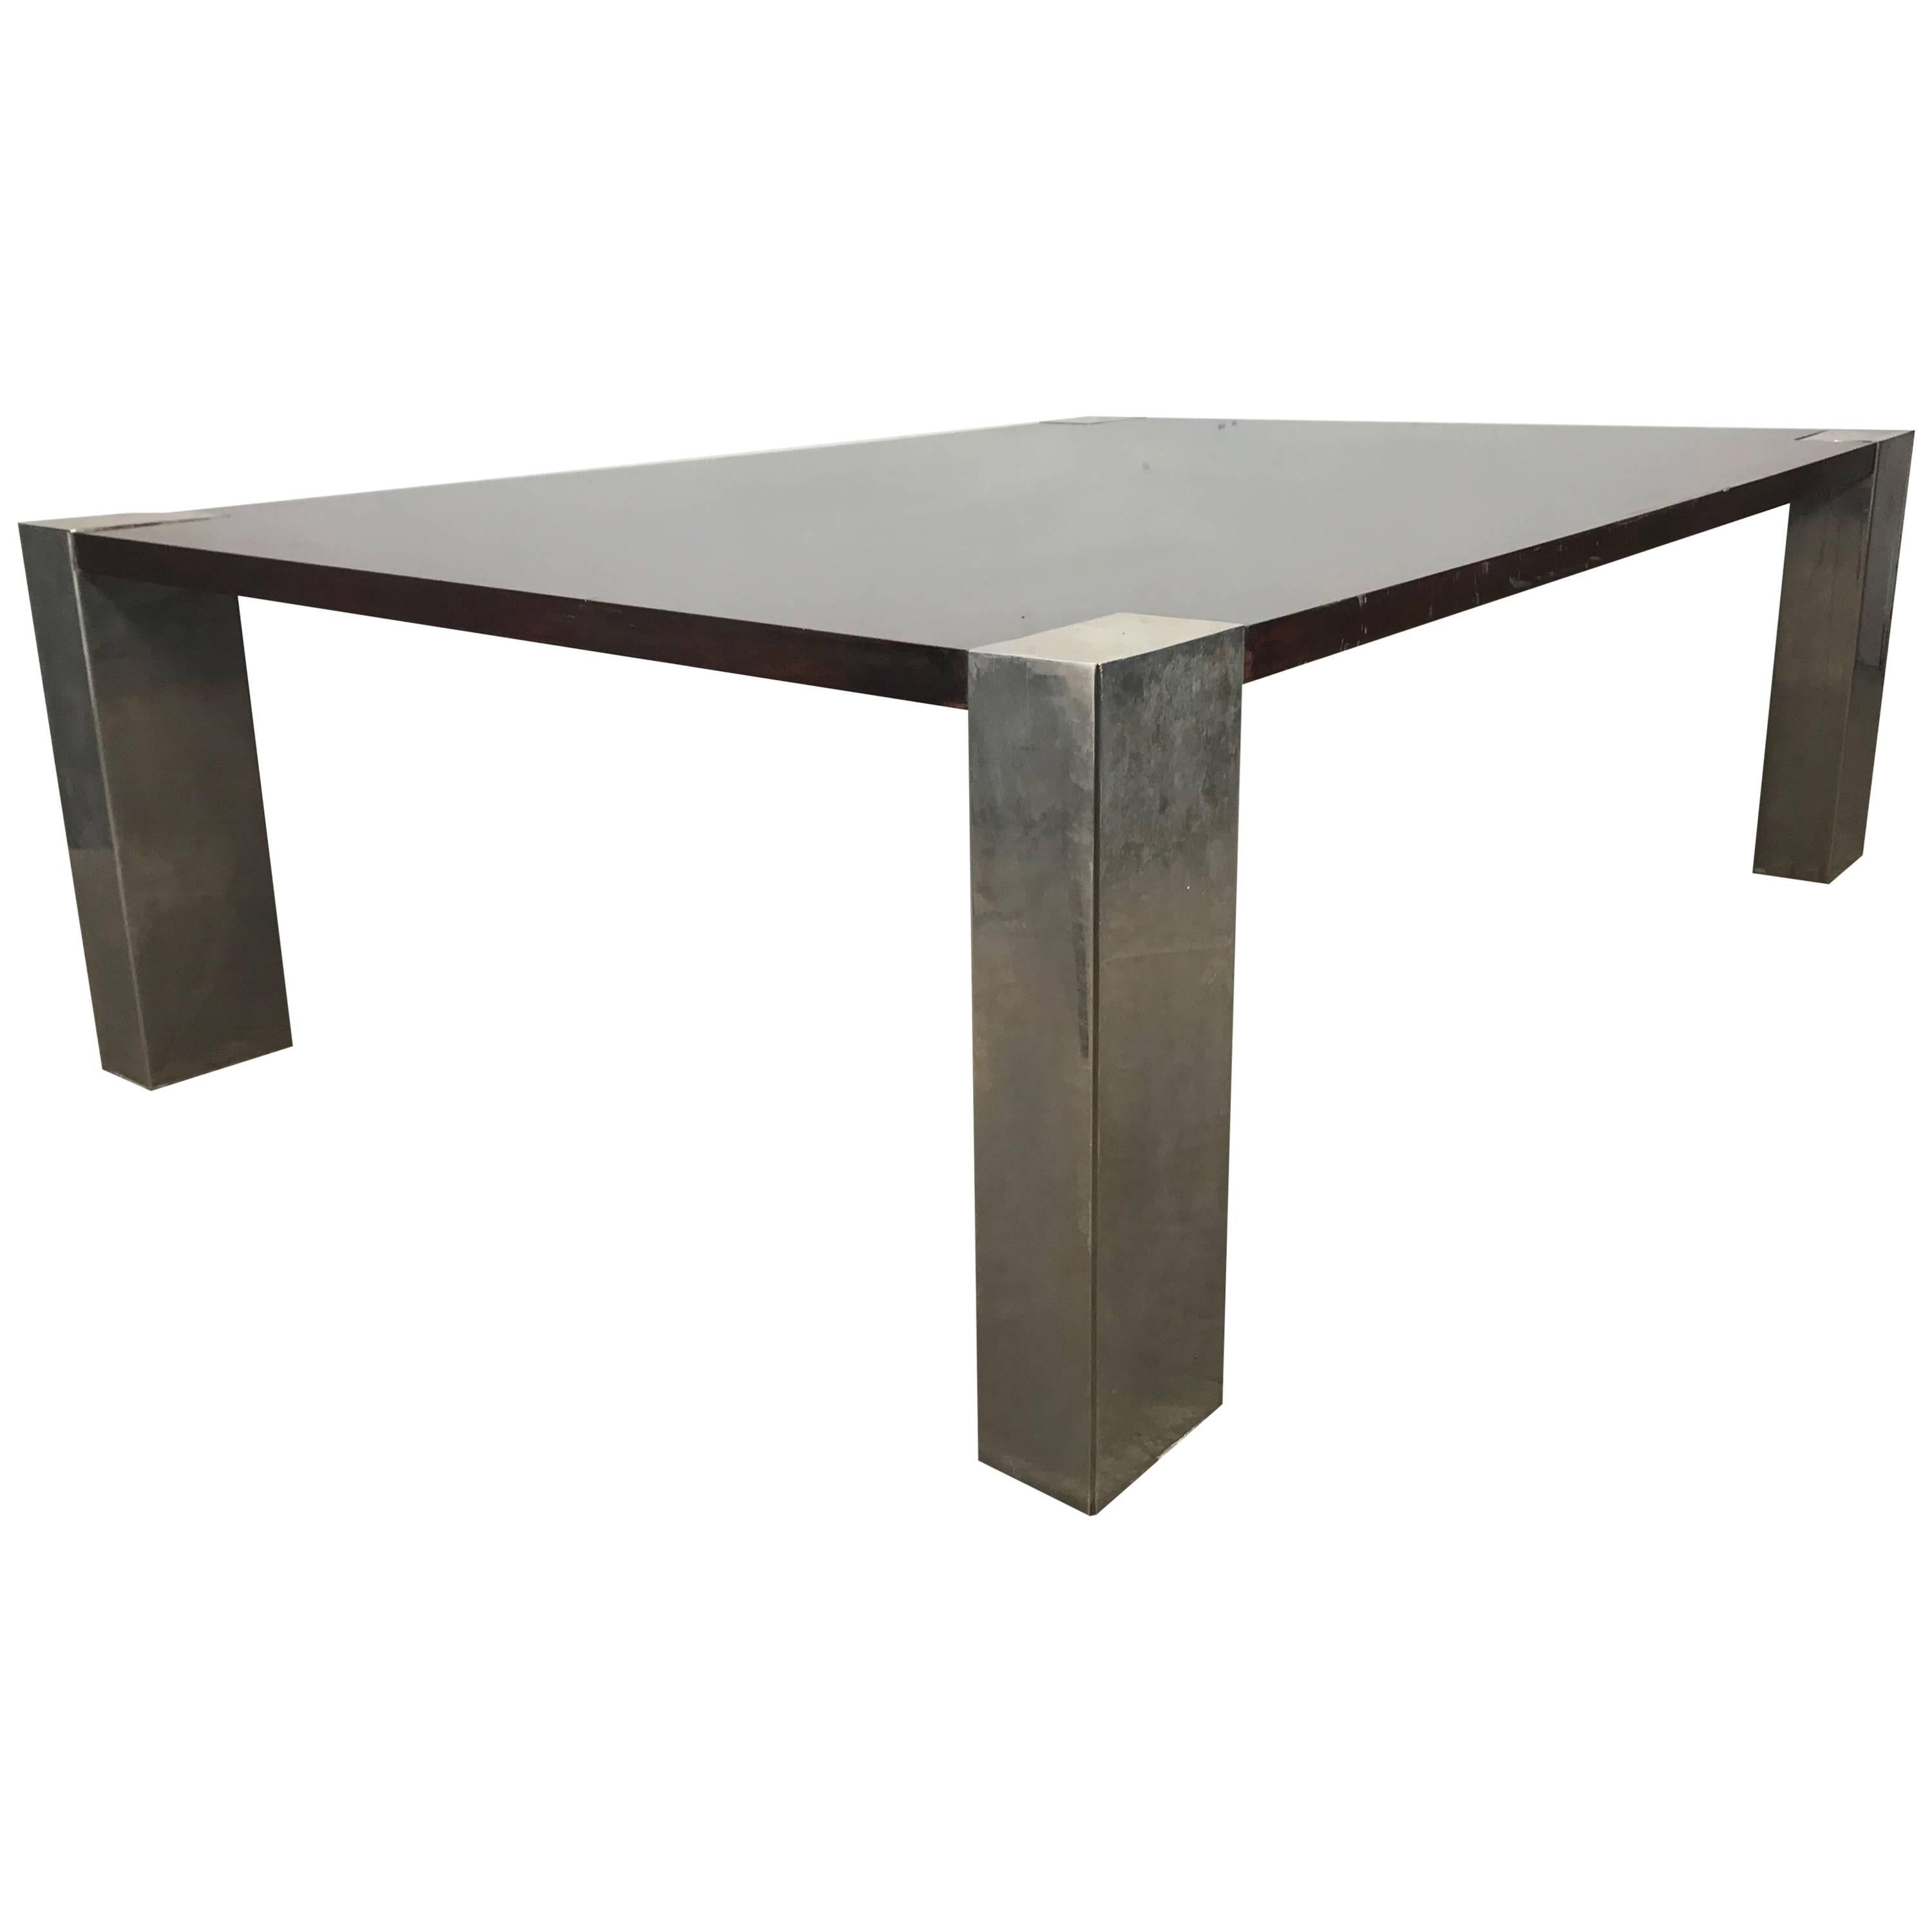 Monumental 1970s Stainless Steel and Wood Coffee Table